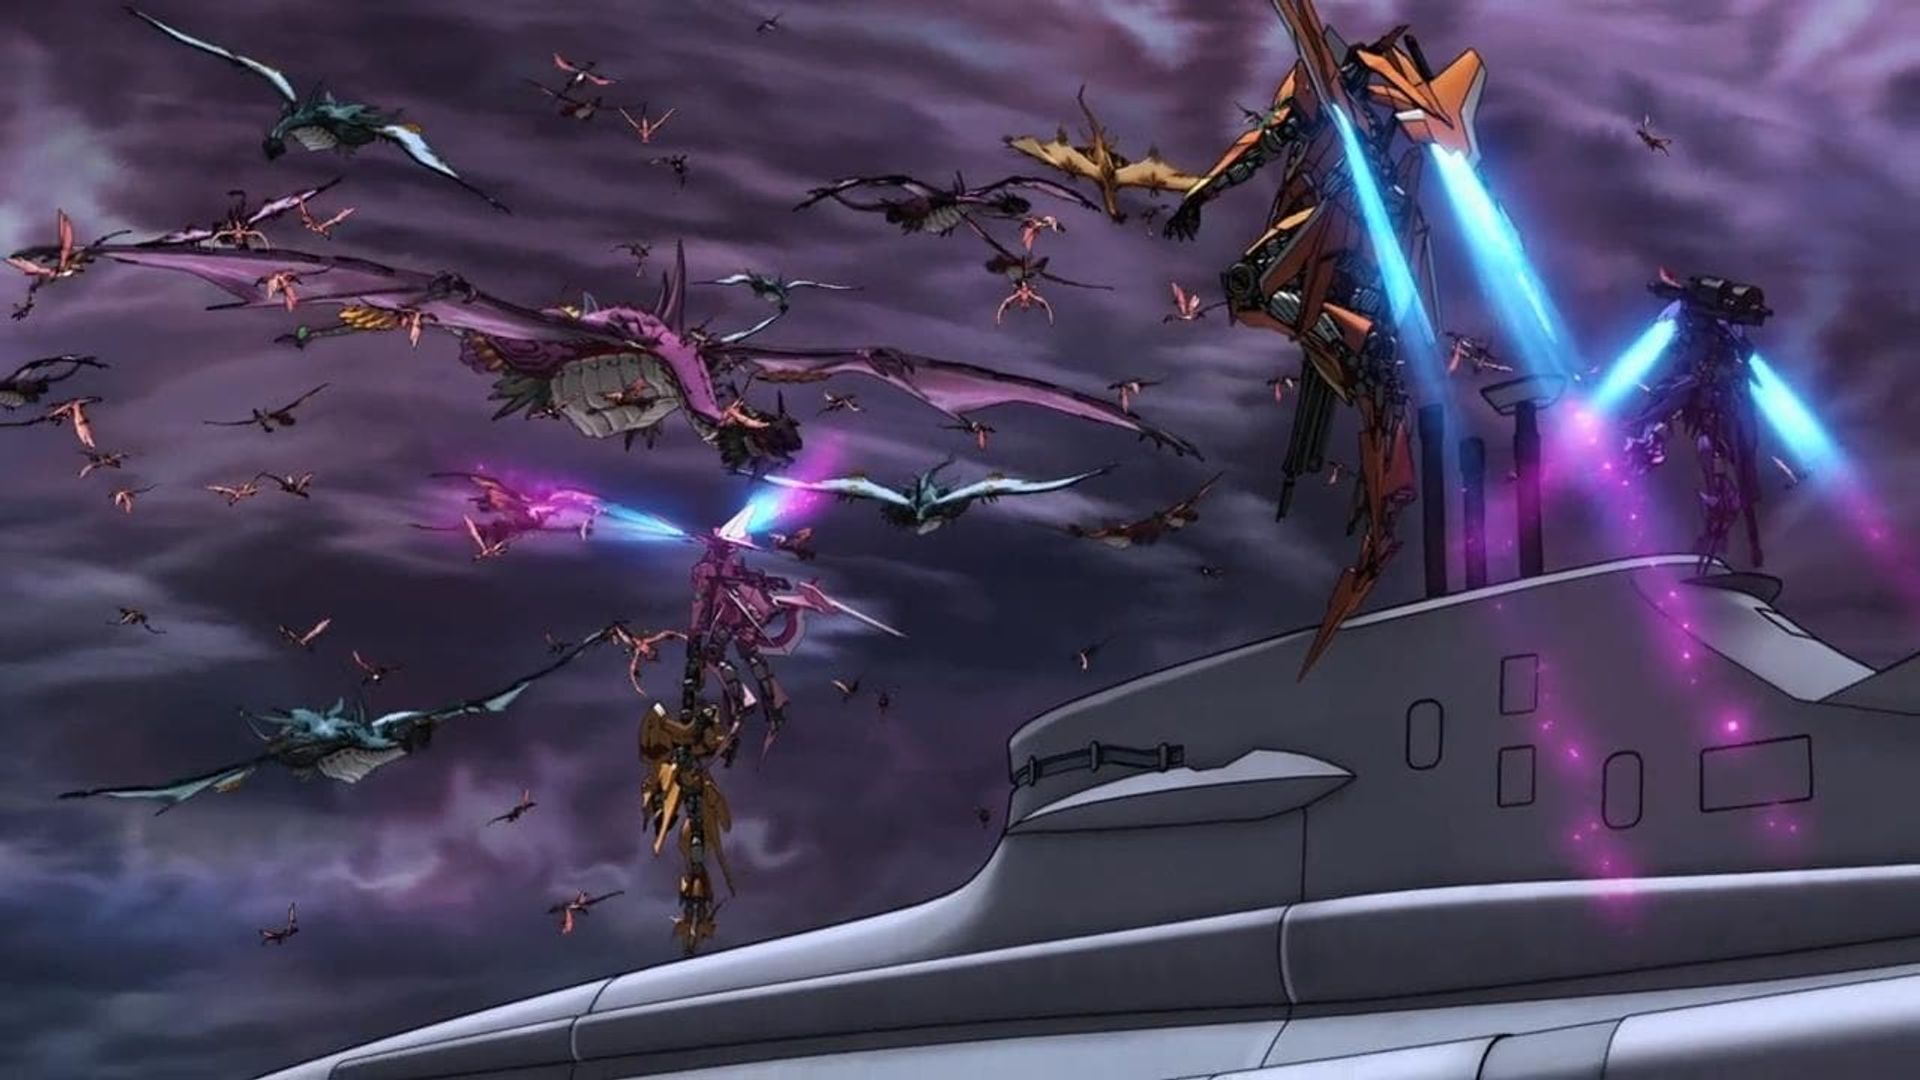 Cross Ange: Rondo of Angel and Dragon background